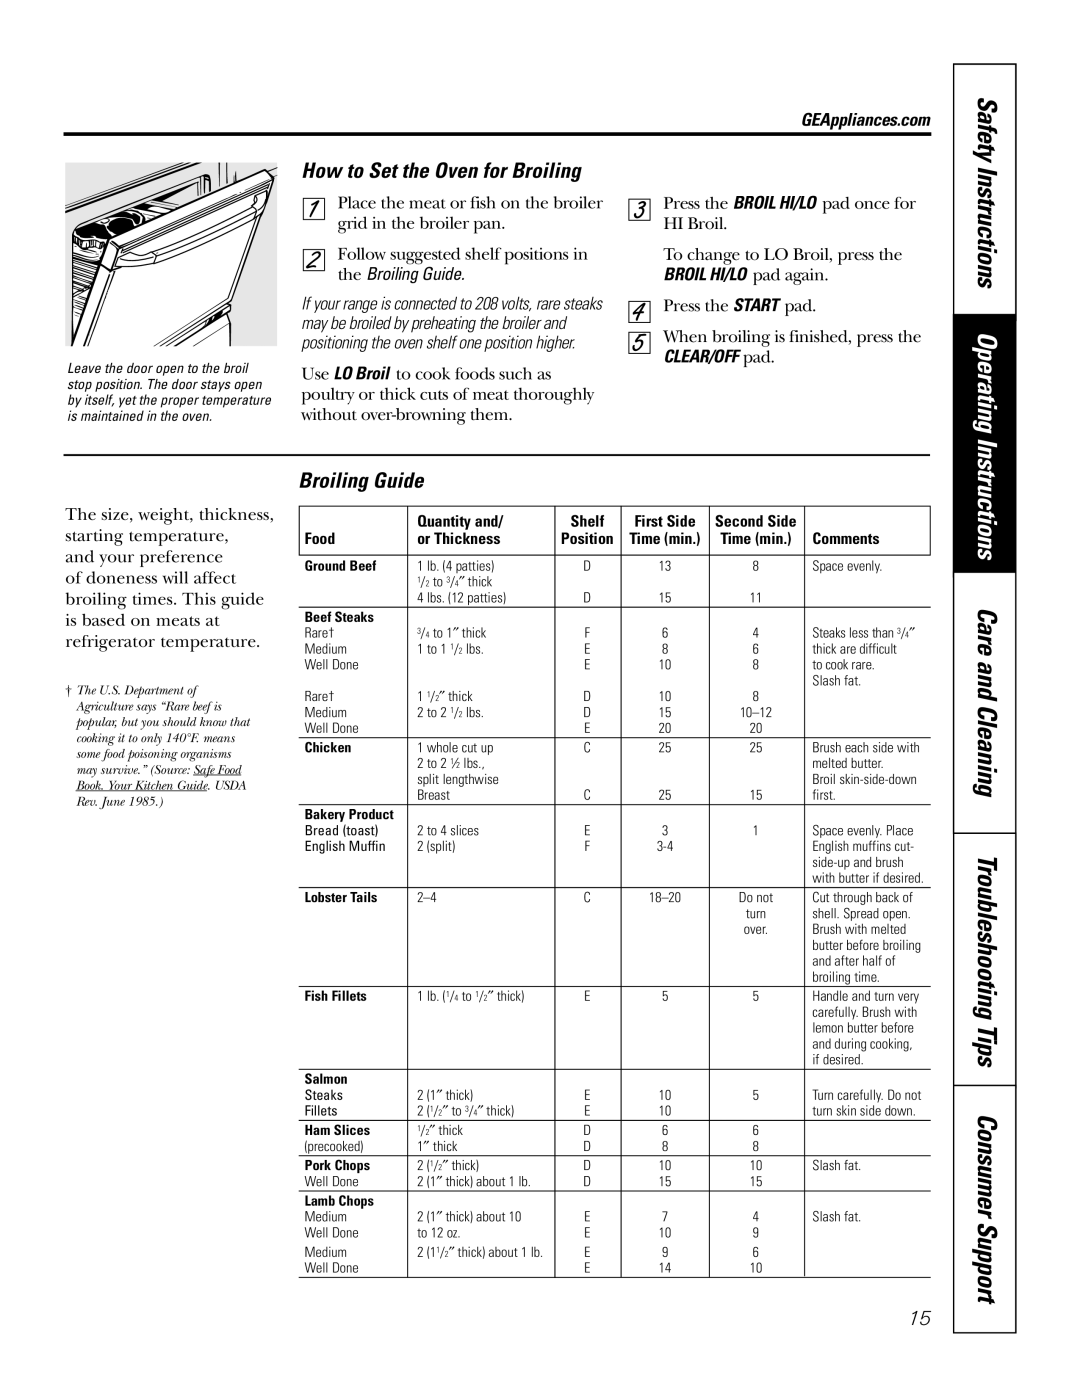 GE JBP82 owner manual Safety, How to Set the Oven for Broiling, Instructions Operating, the Broiling Guide 